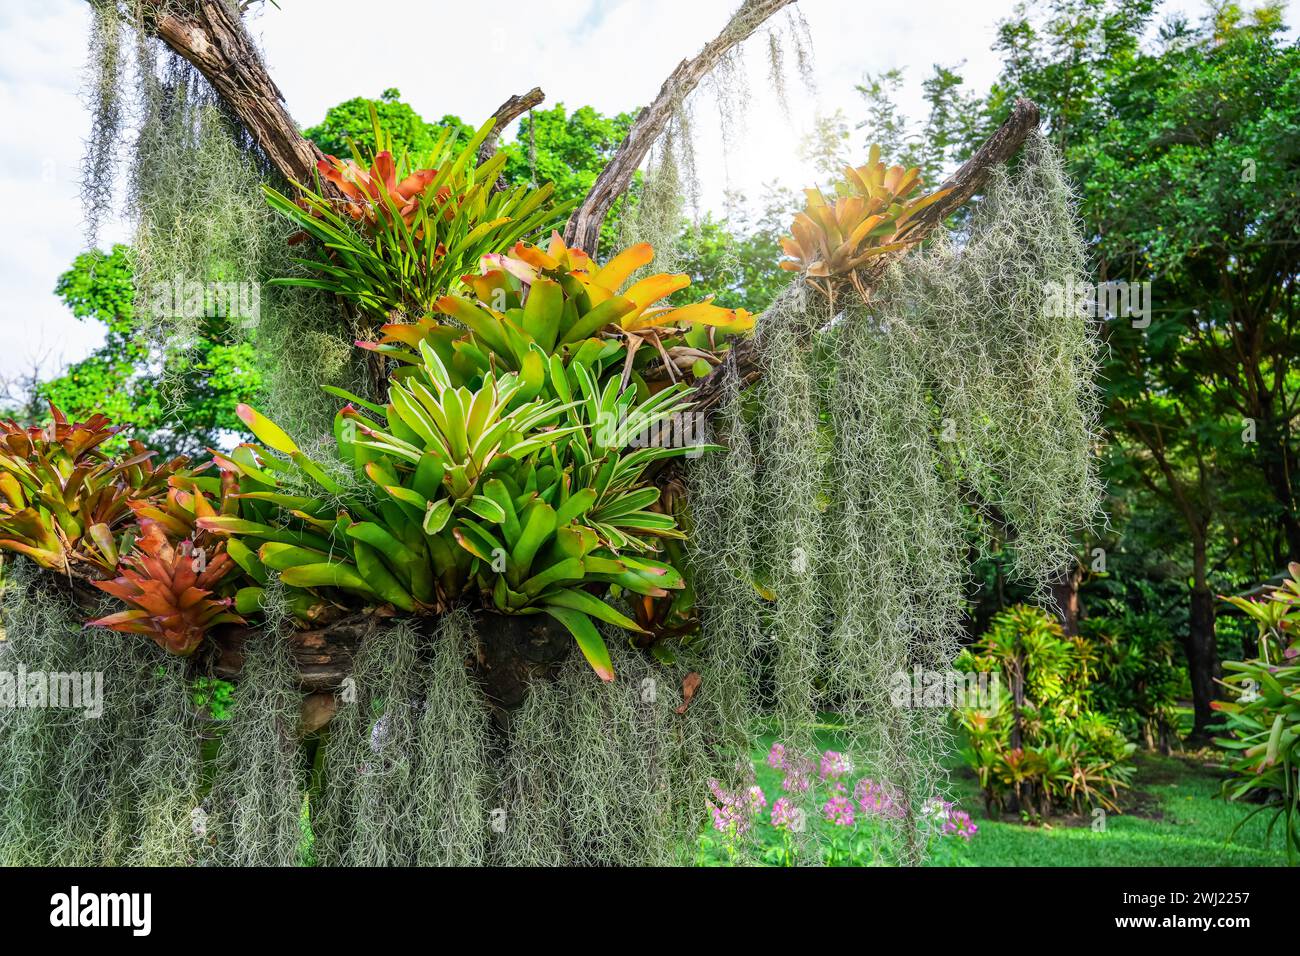 Tillandsia Usneoides and bromelain on tree branches in tropical rainforest, plant wildlife. Stock Photo